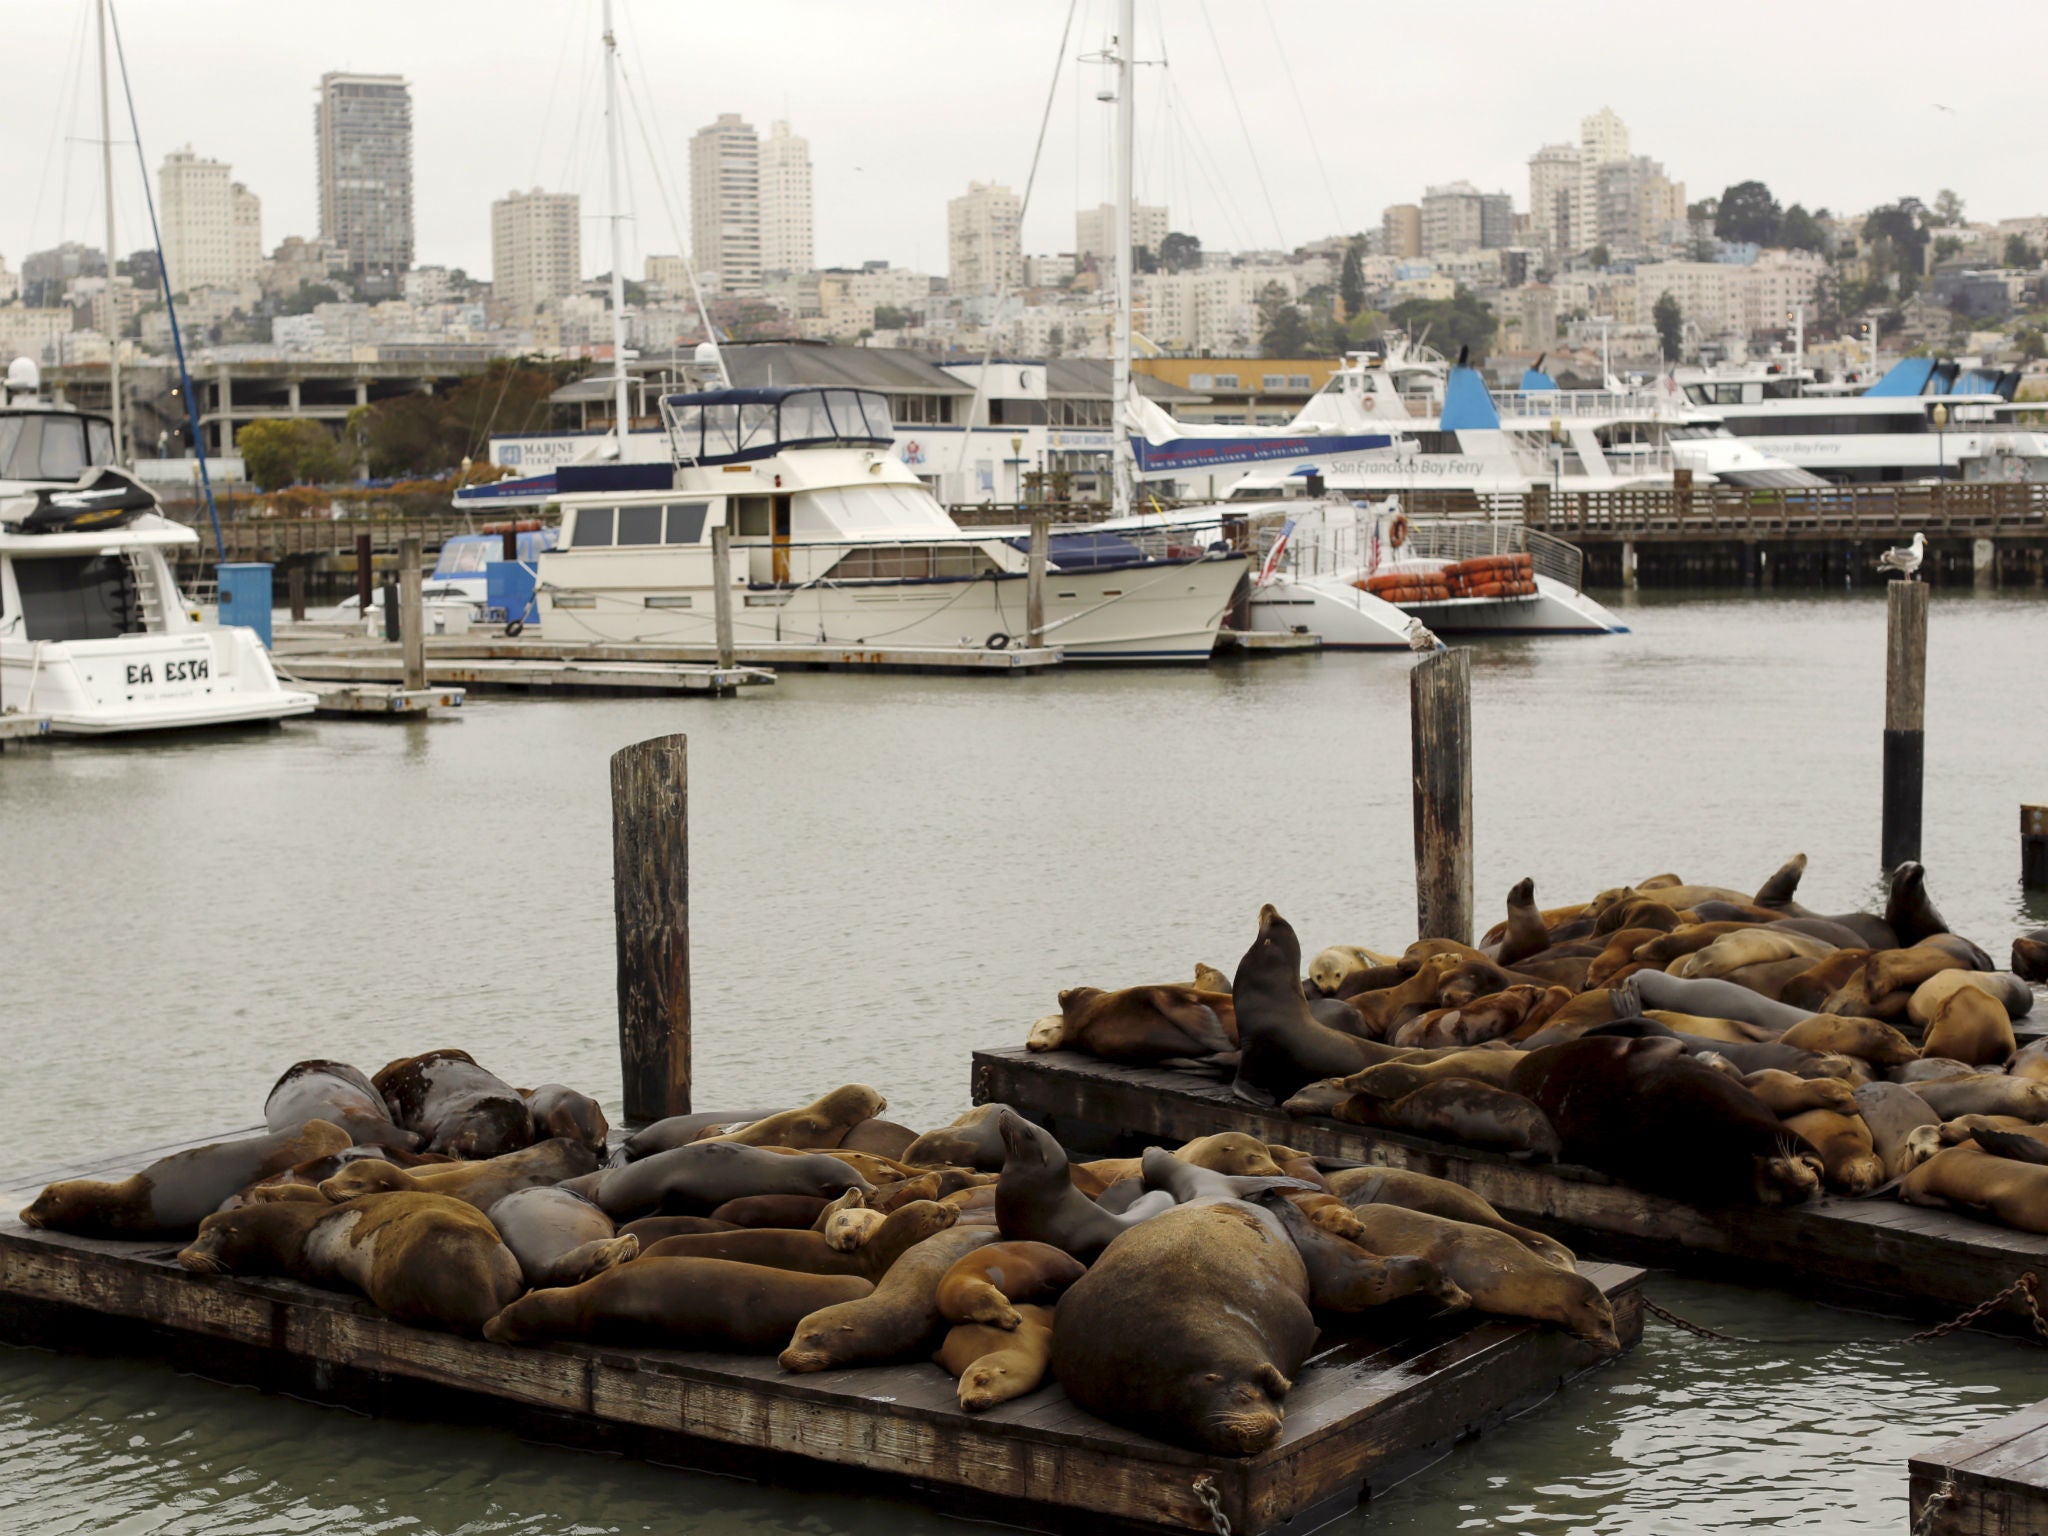 A view of Pier 39 in San Francisco, which the former Marine allegedly targeted because ‘he had been there before and knew that it was a heavily crowded area’